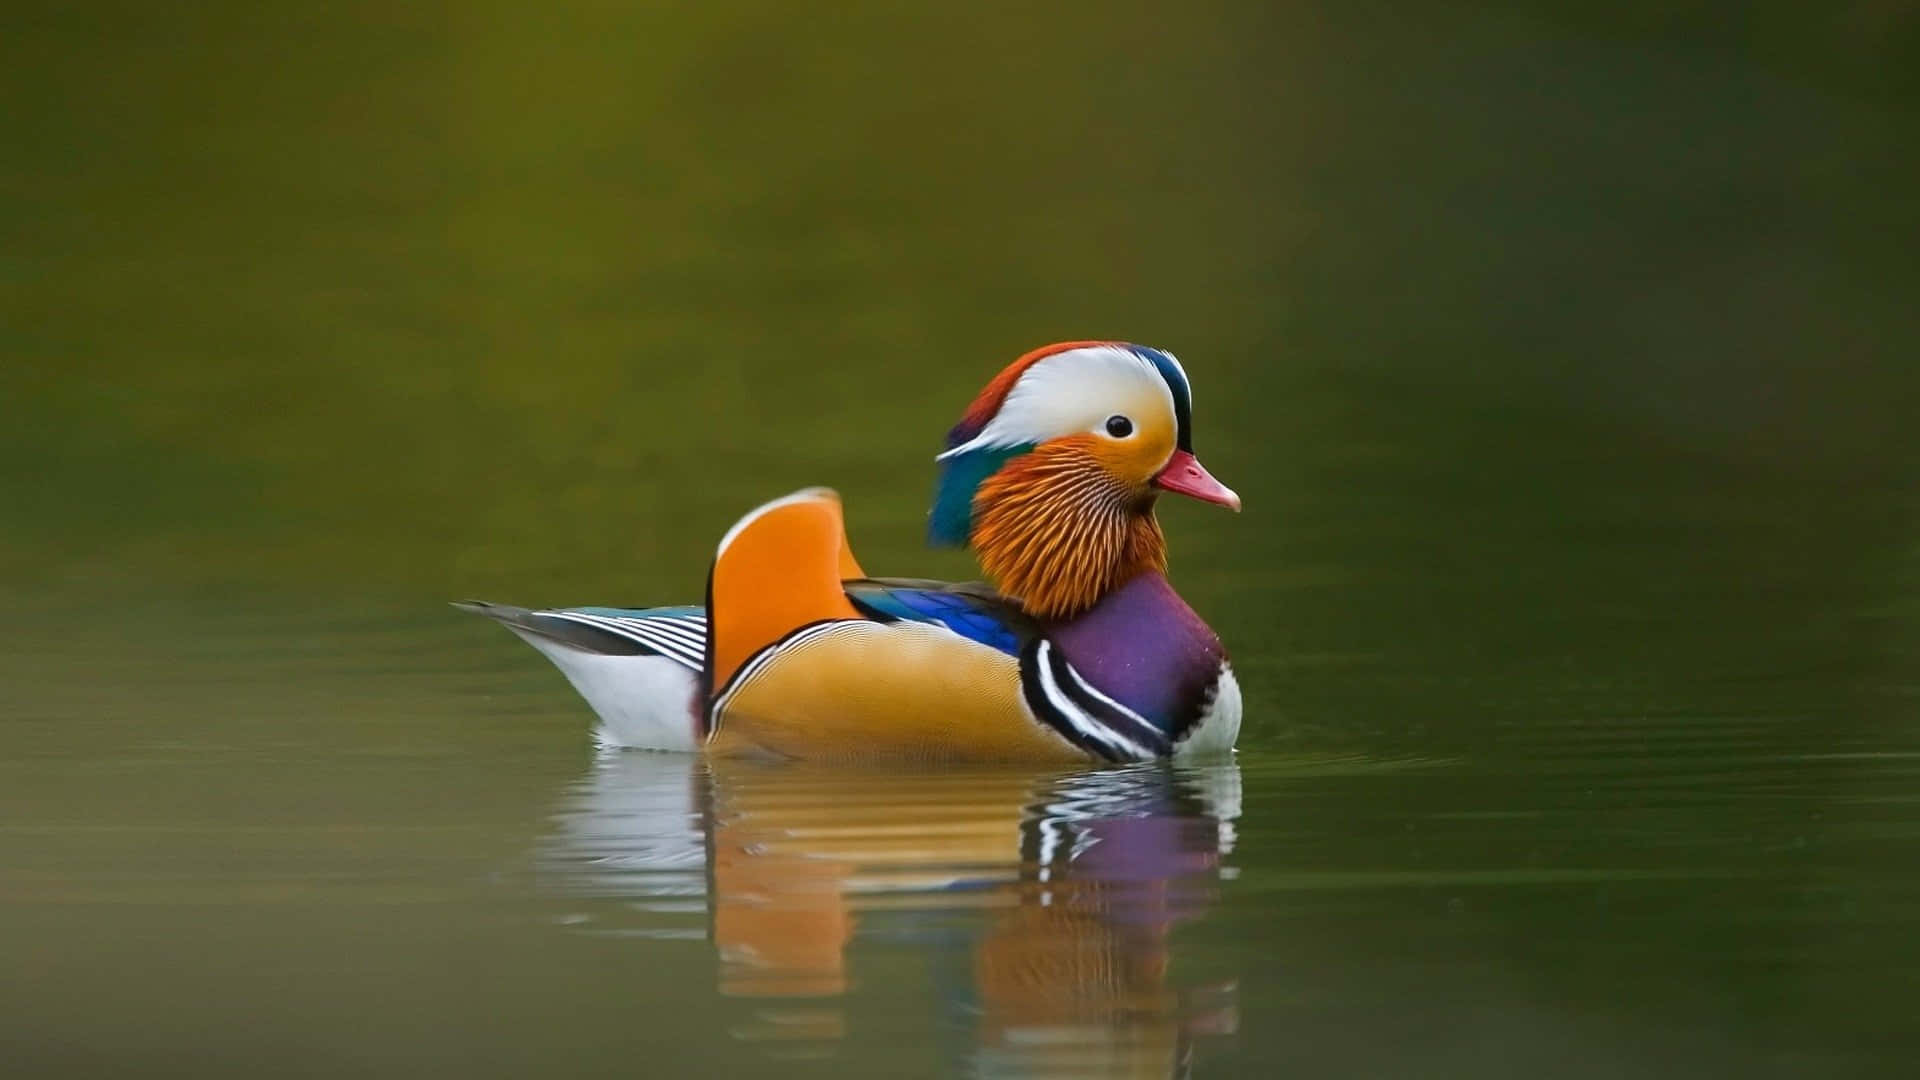 Look At This Adorable Duck! Background